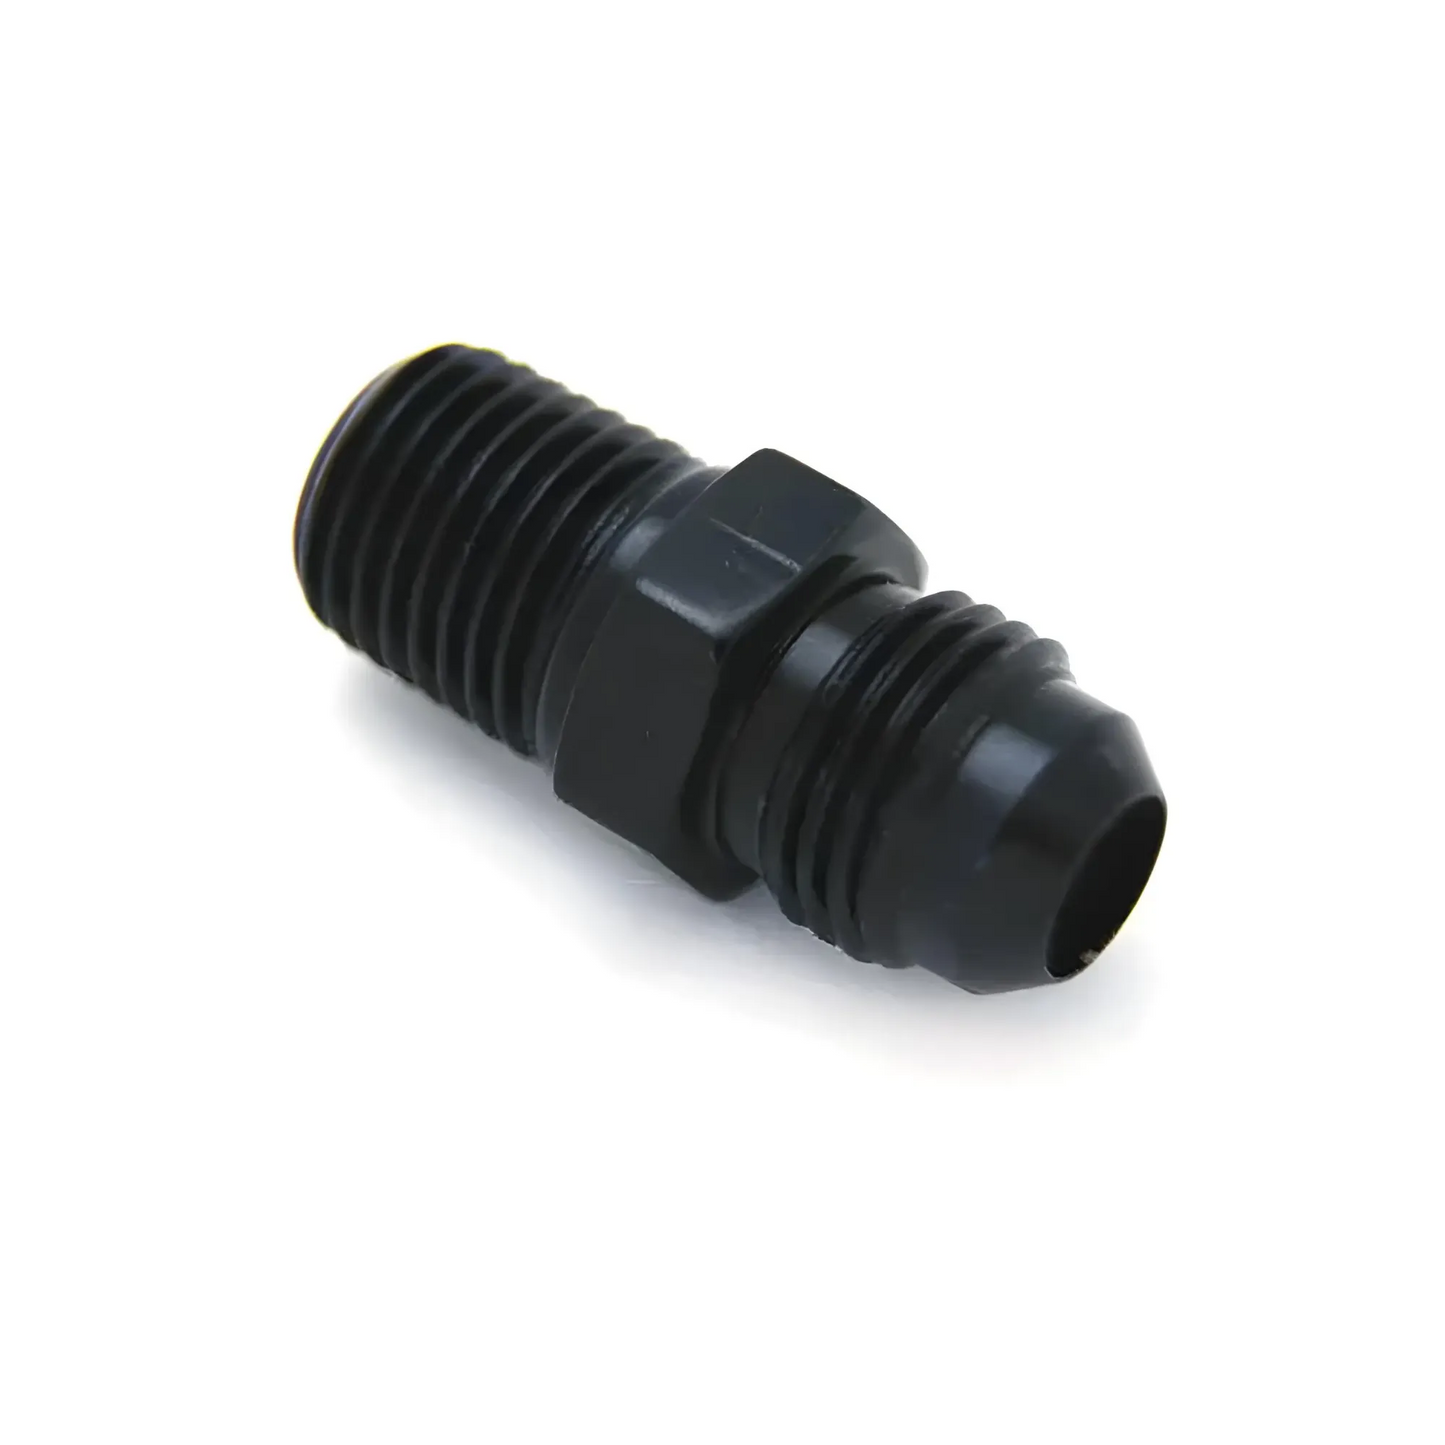 1/4" NPT x 6AN Straight Fitting - Anodized Black